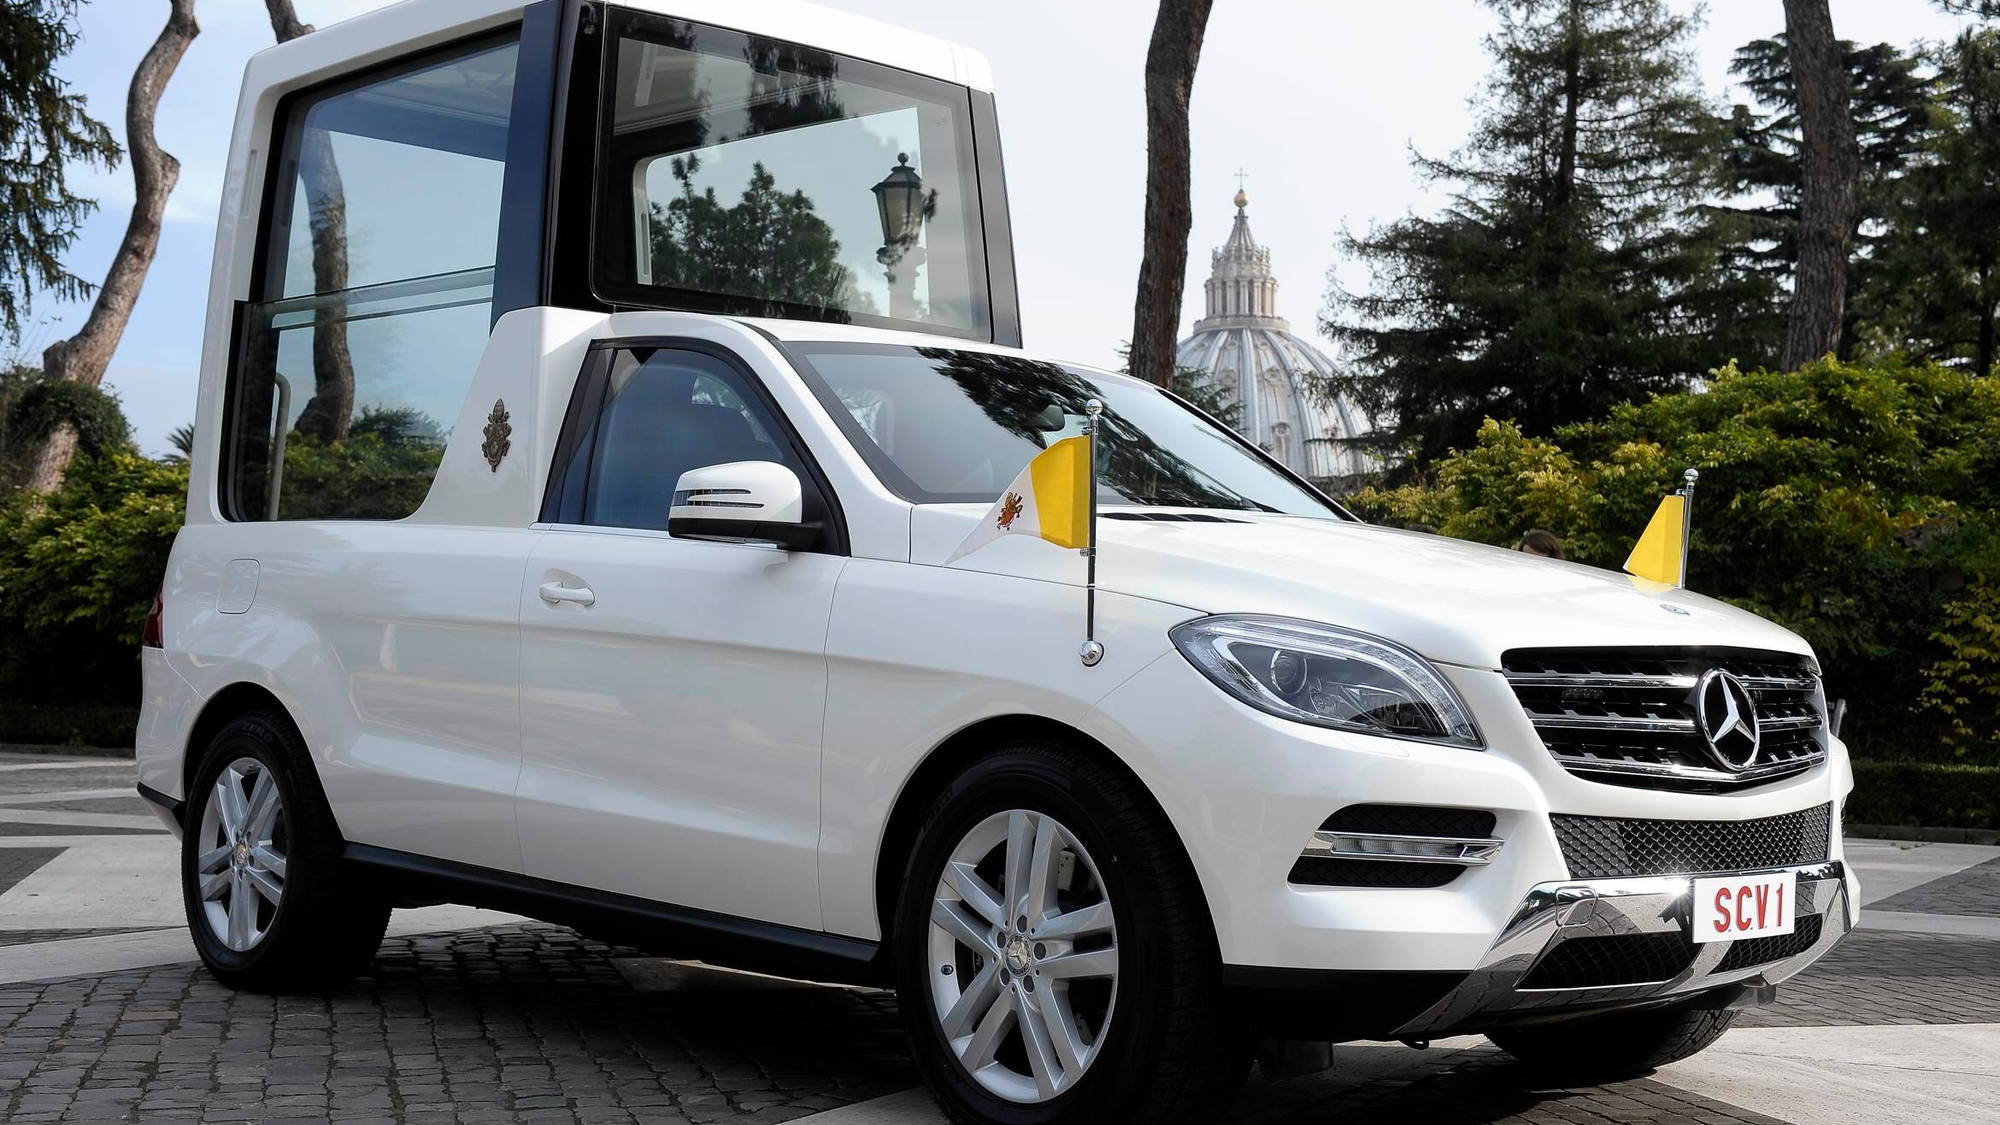 Pope Benedict XVI takes delivery of his new M Class Popemobile at the Vatican, December 2012